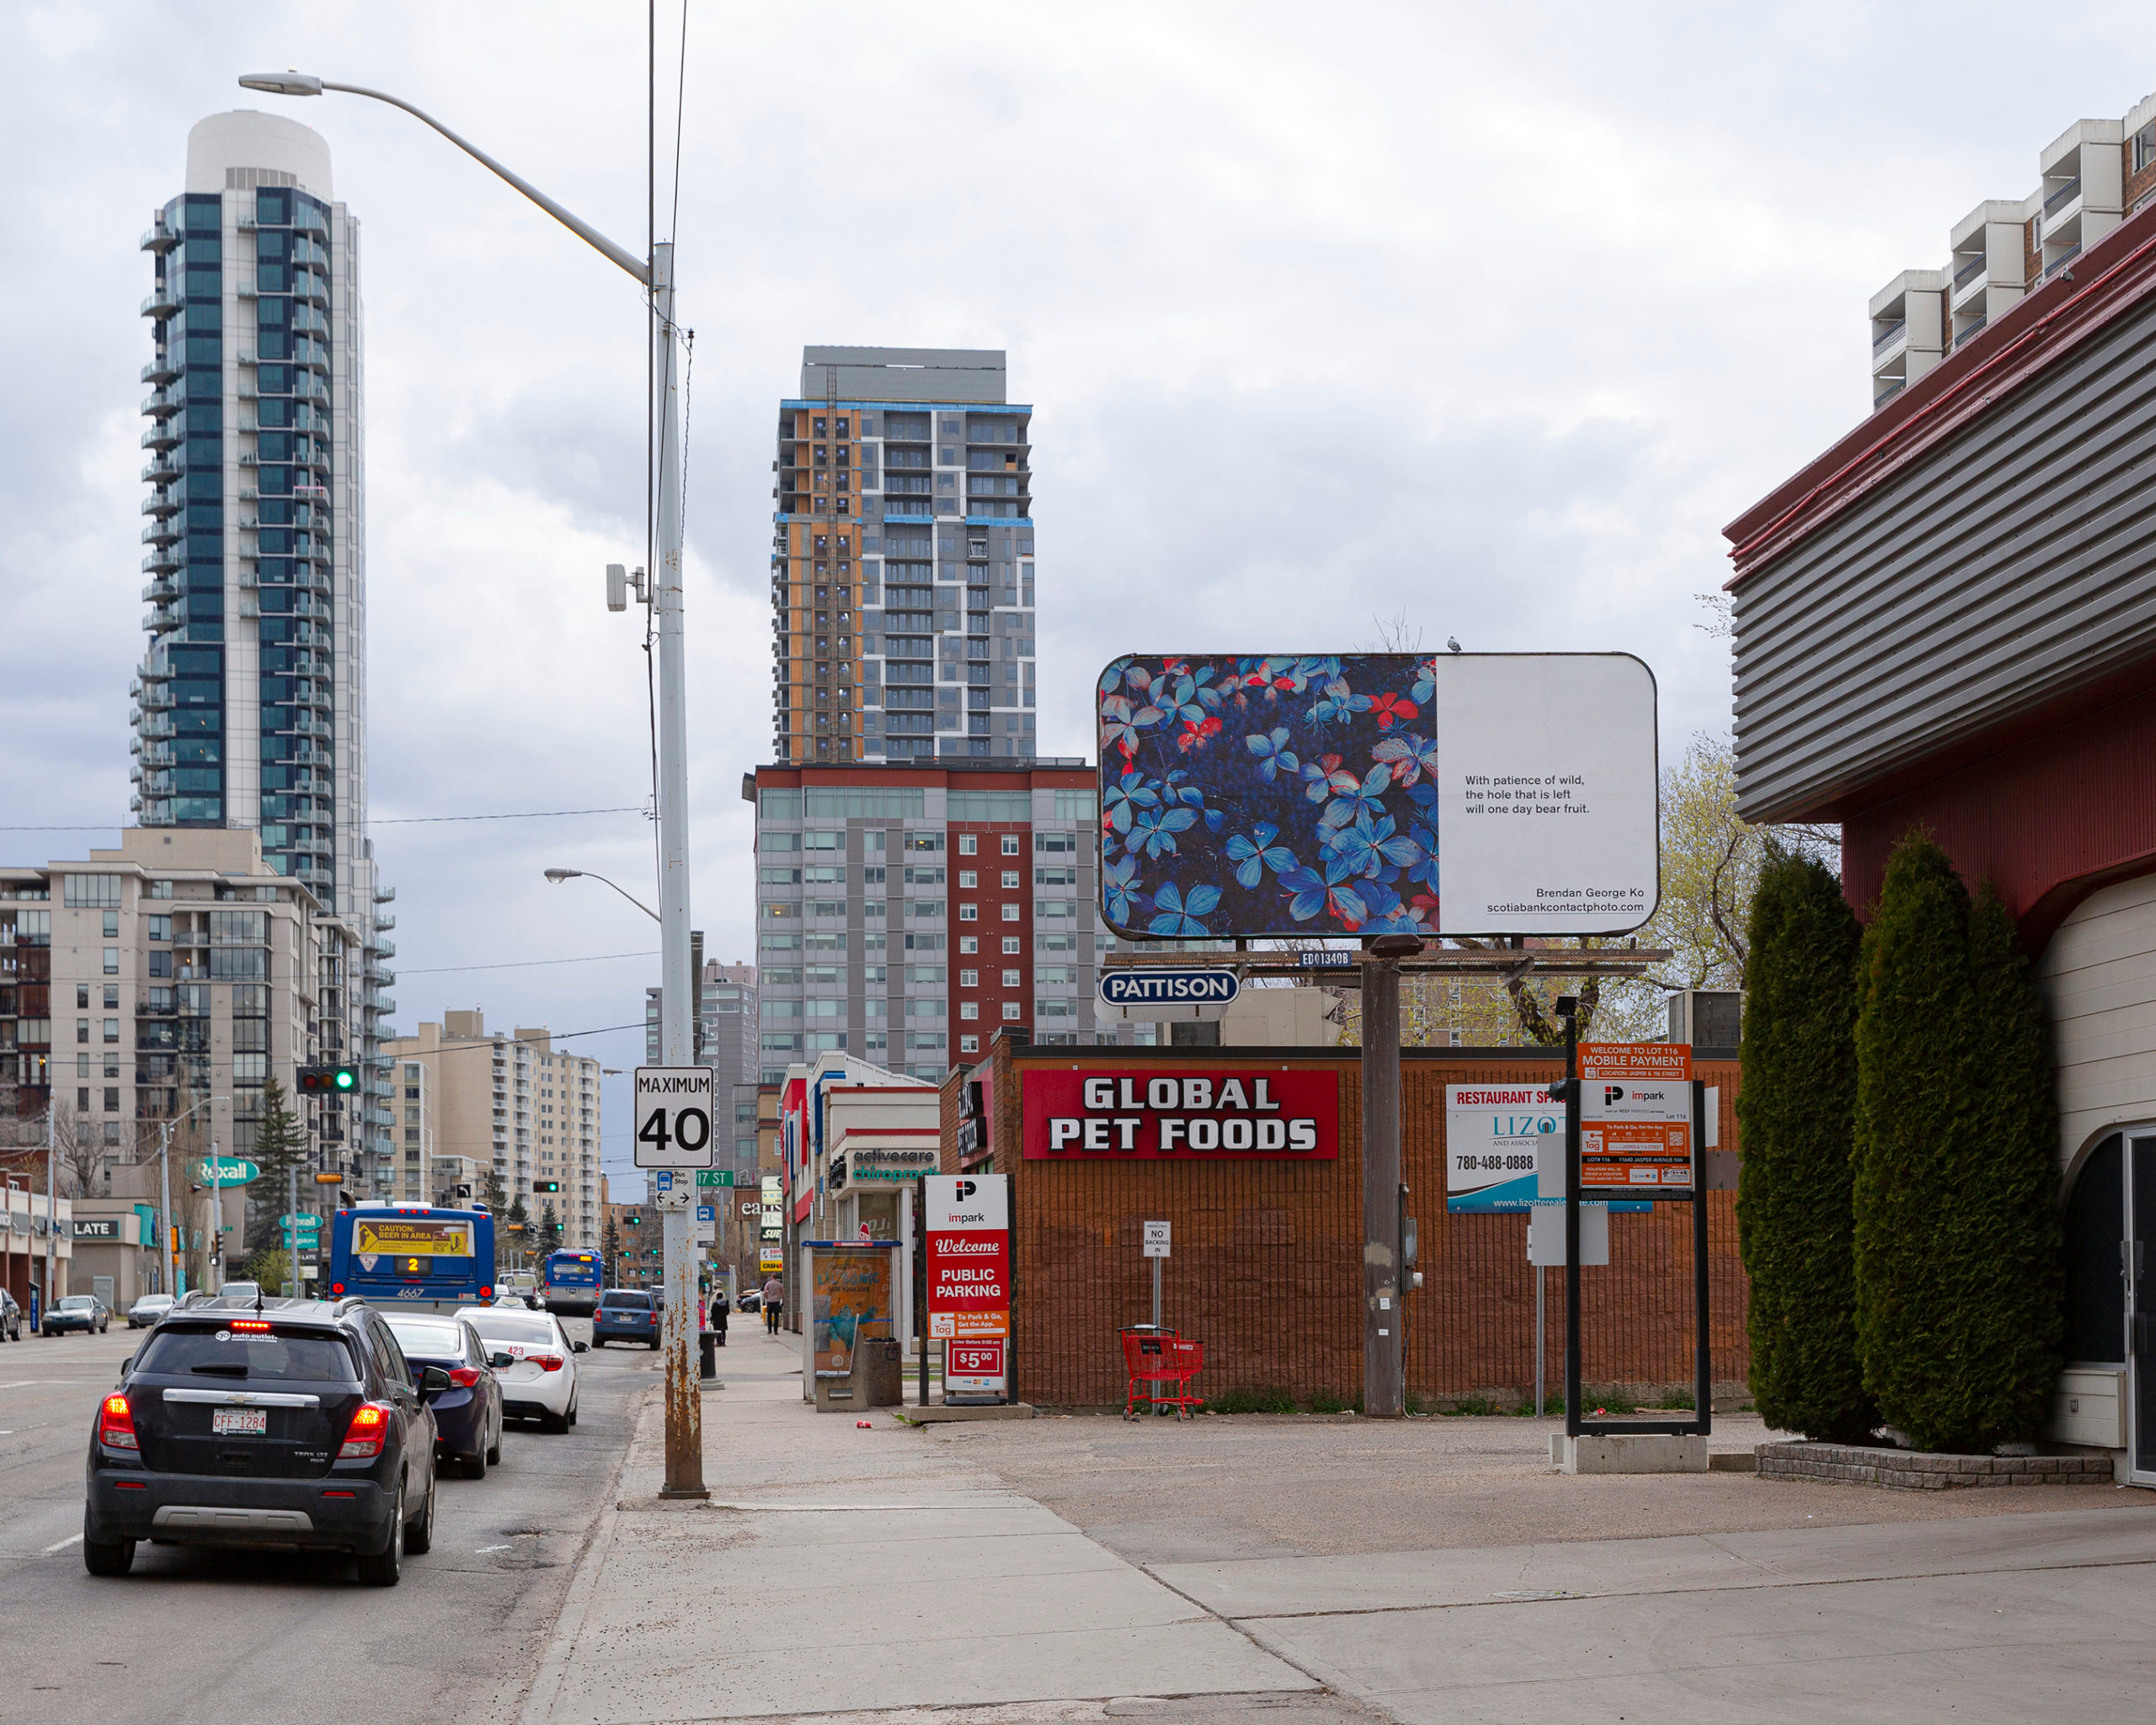     Brendan George Ko, The Forest is Wired for Wisdom, installation on billboards in Edmonton and 9 other Canadian cities, 2022. Courtesy of the artist and CONTACT. Photo: Julianna Damer

